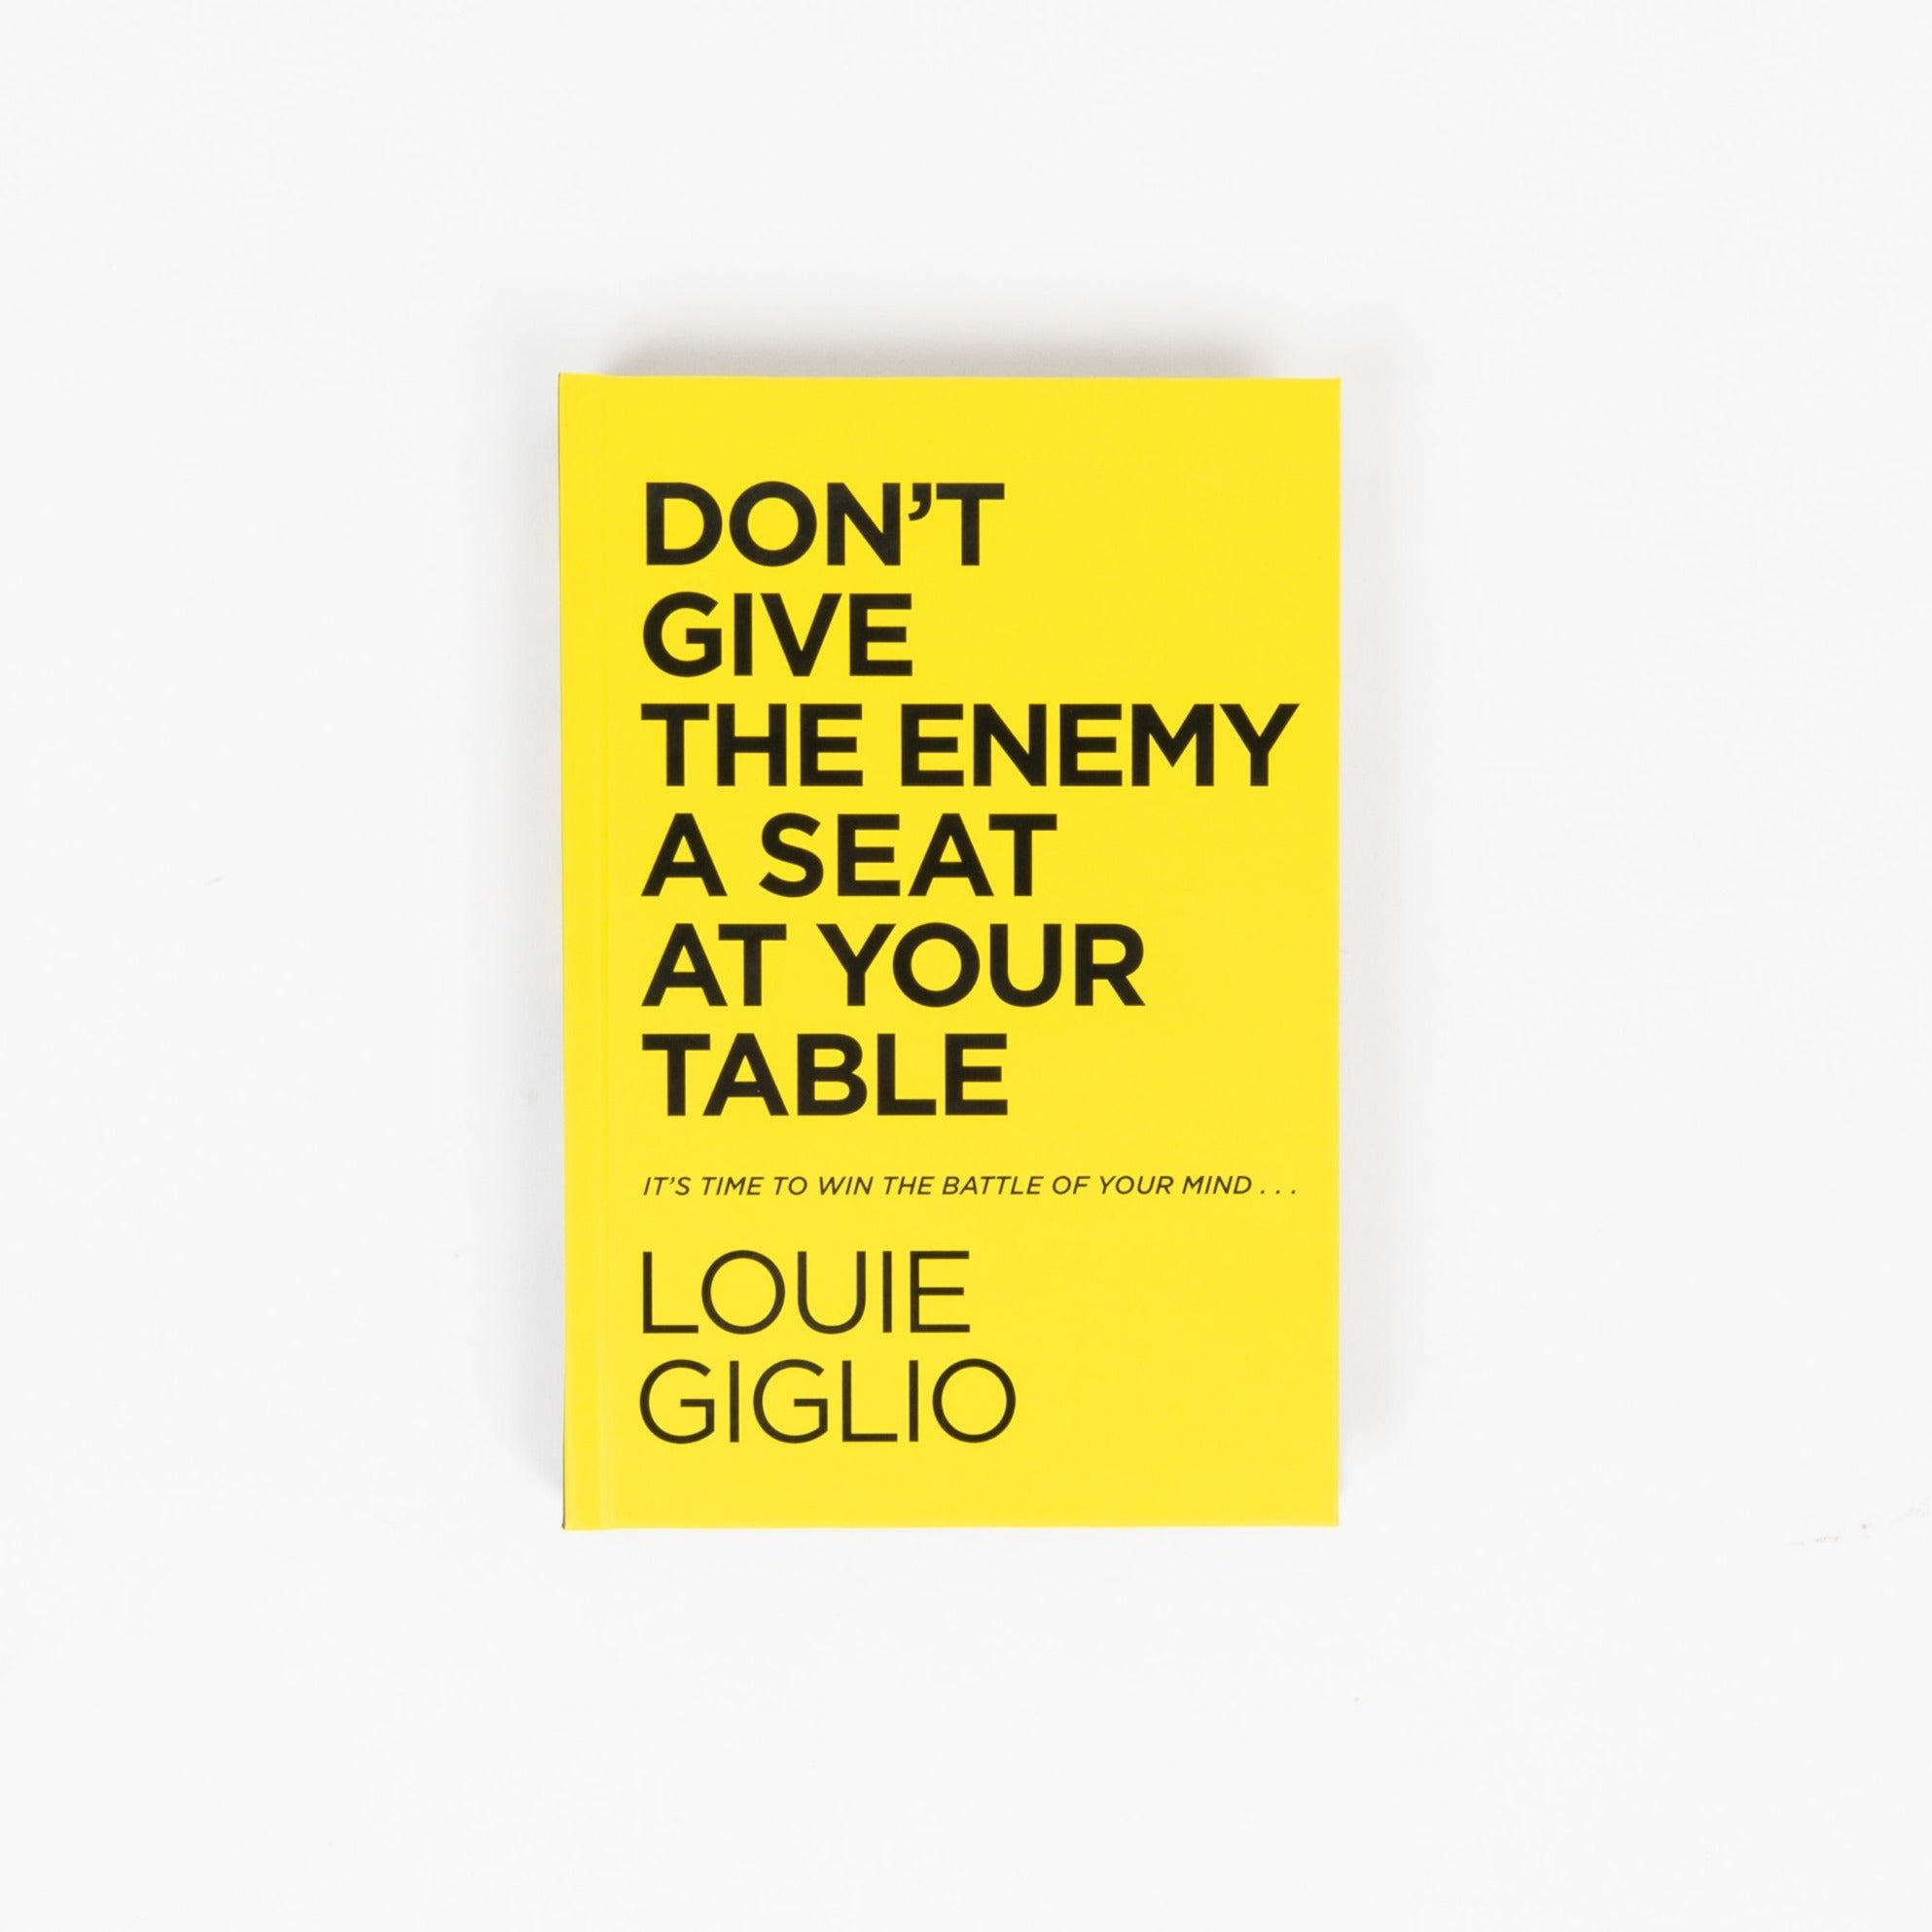 Don't Give The Enemy a Seat at Your Table - Louie Giglio